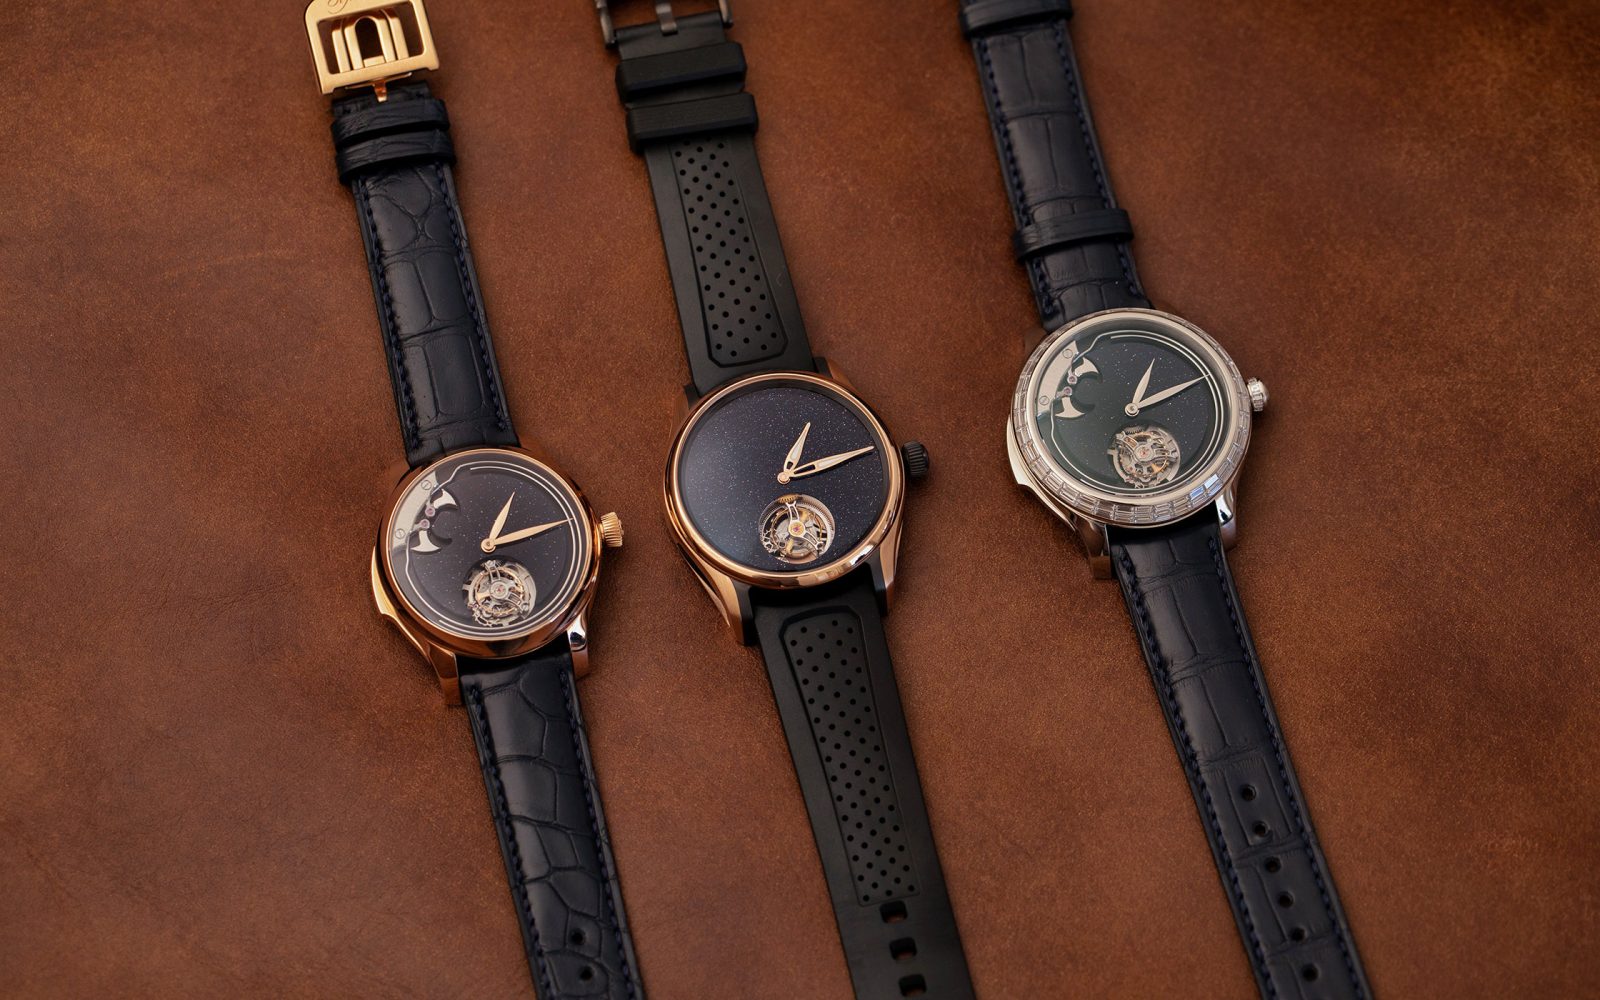 H. Moser & Cie. Luxury Watches | Cellini Jewelers NYC